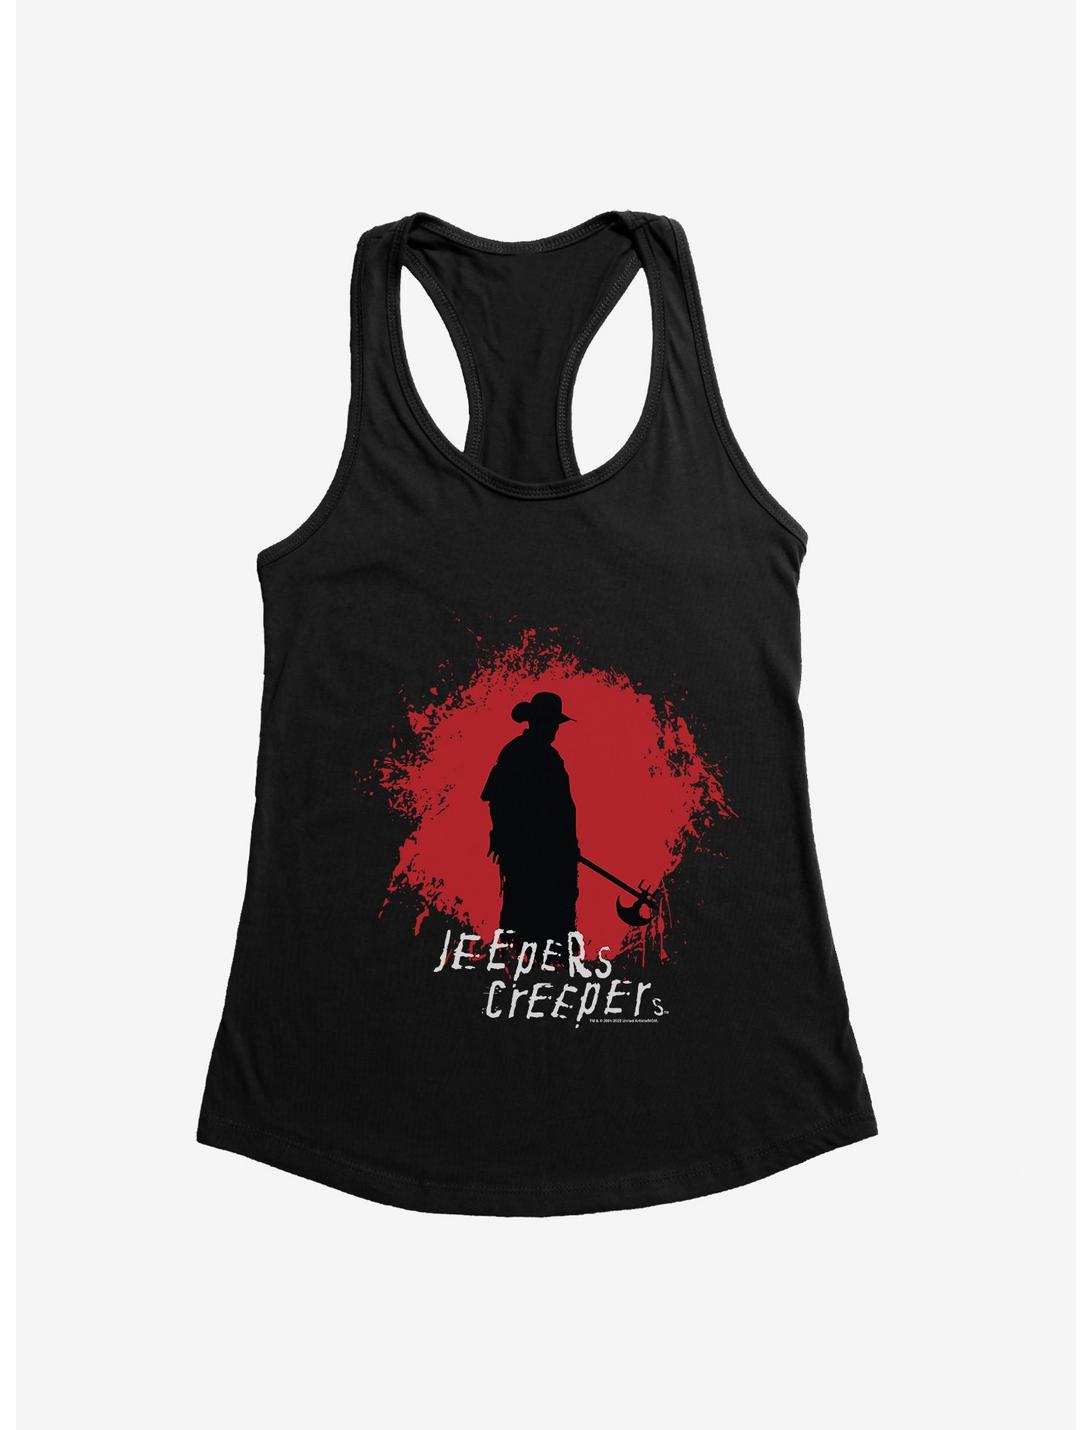 Jeepers Creepers The Creeper Womens Tank Top, BLACK, hi-res